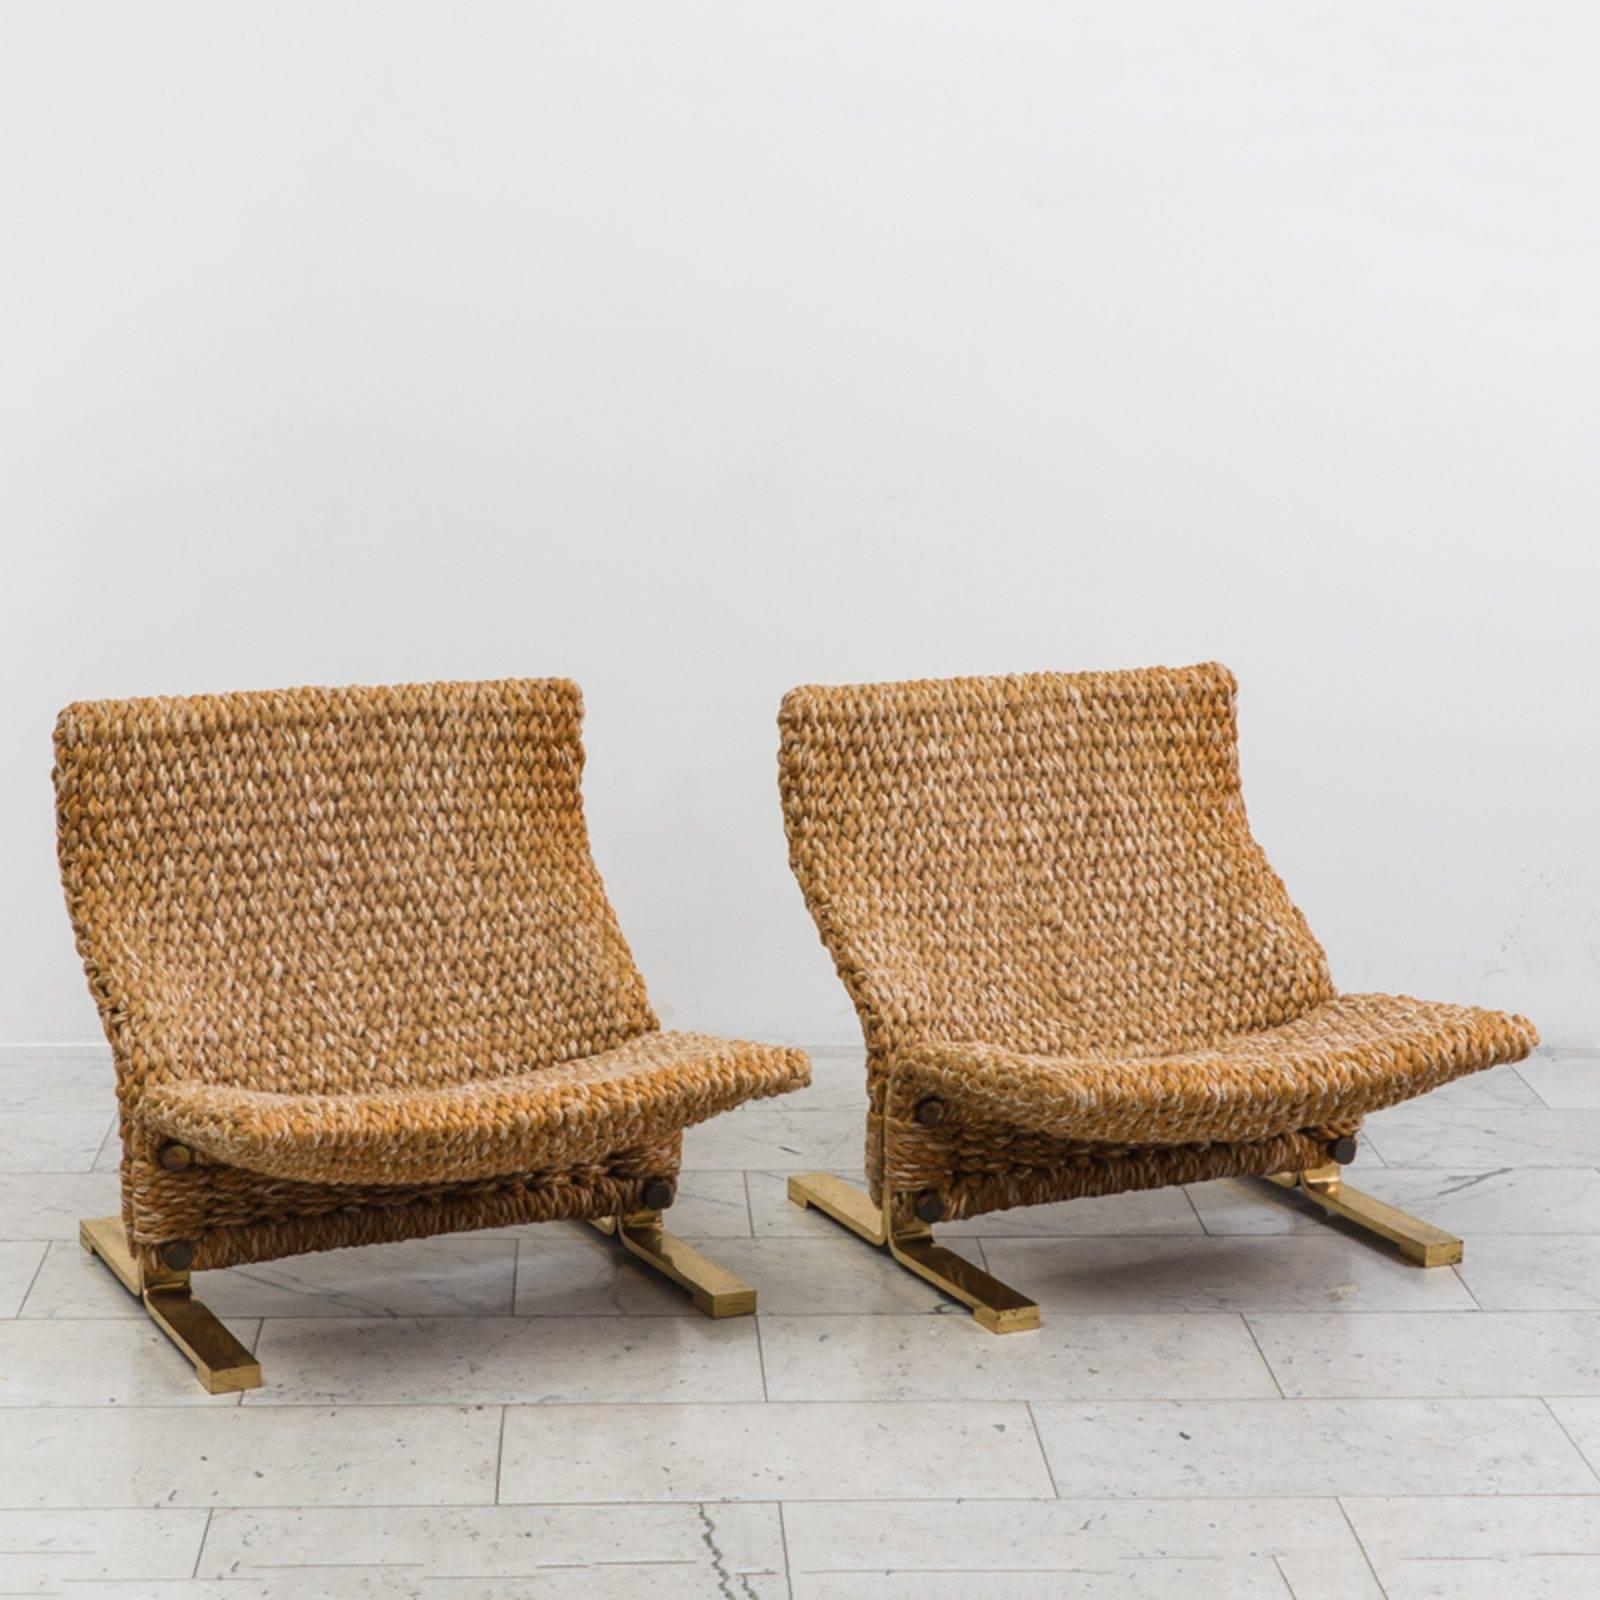 Marzio Cecchi, Pair of Low Knitted Lounge Chairs, IT, c.1970s